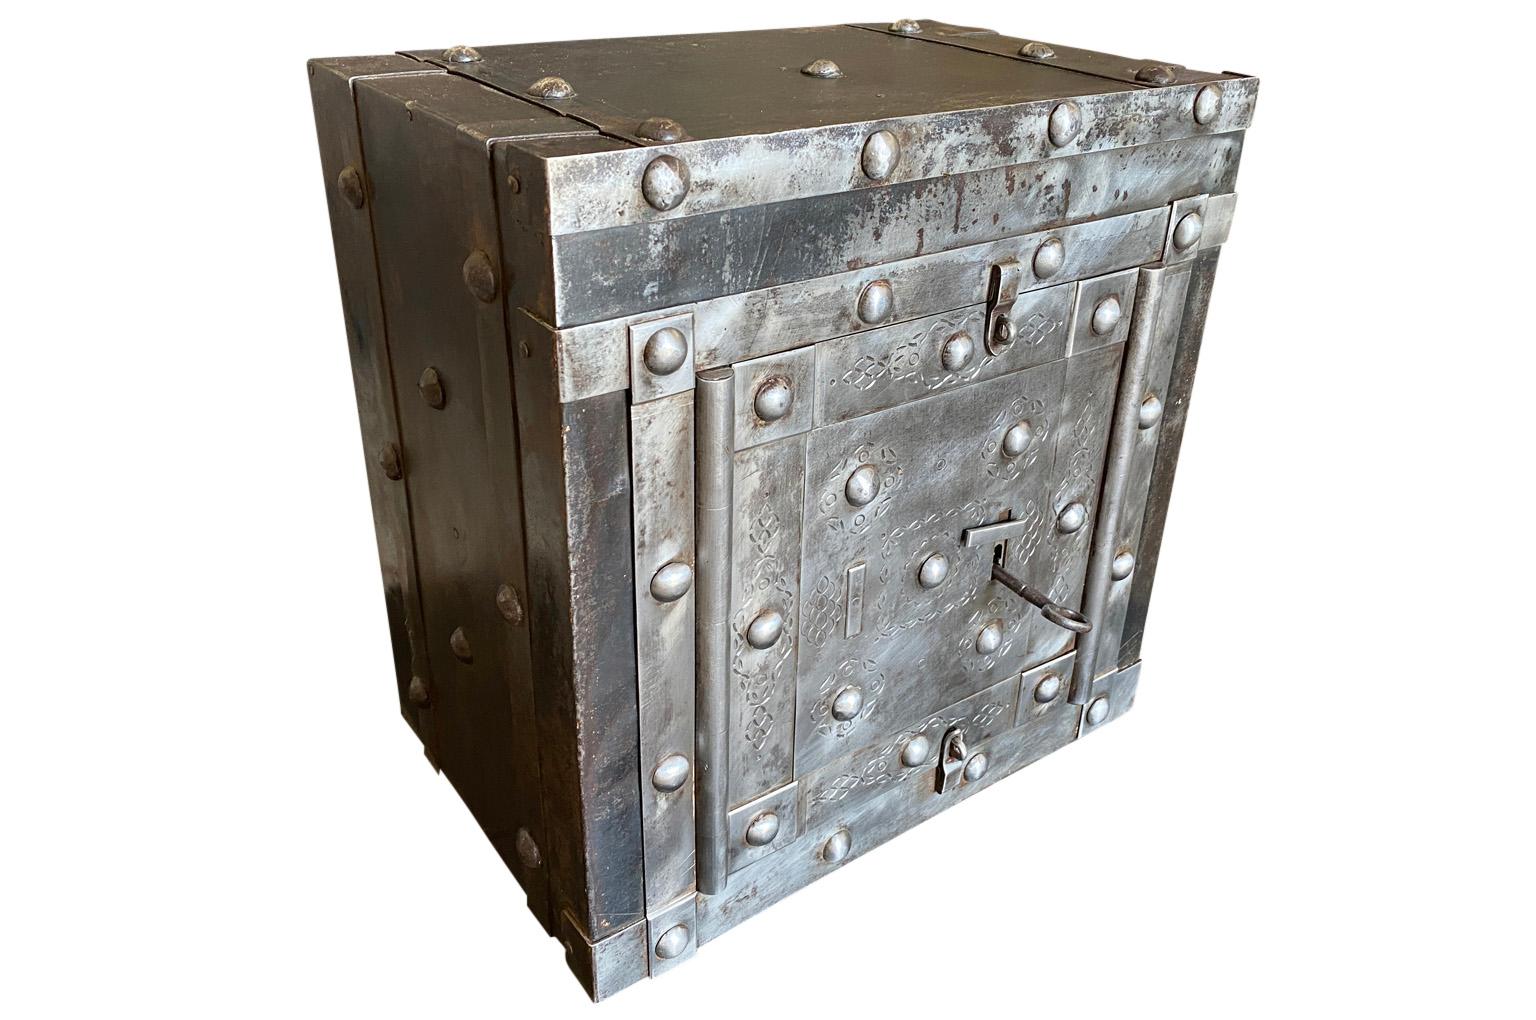 A very handsome early 19th century safe box - coffre wonderfully constructed from iron. A wonderful accessory for a table top or bookcase.